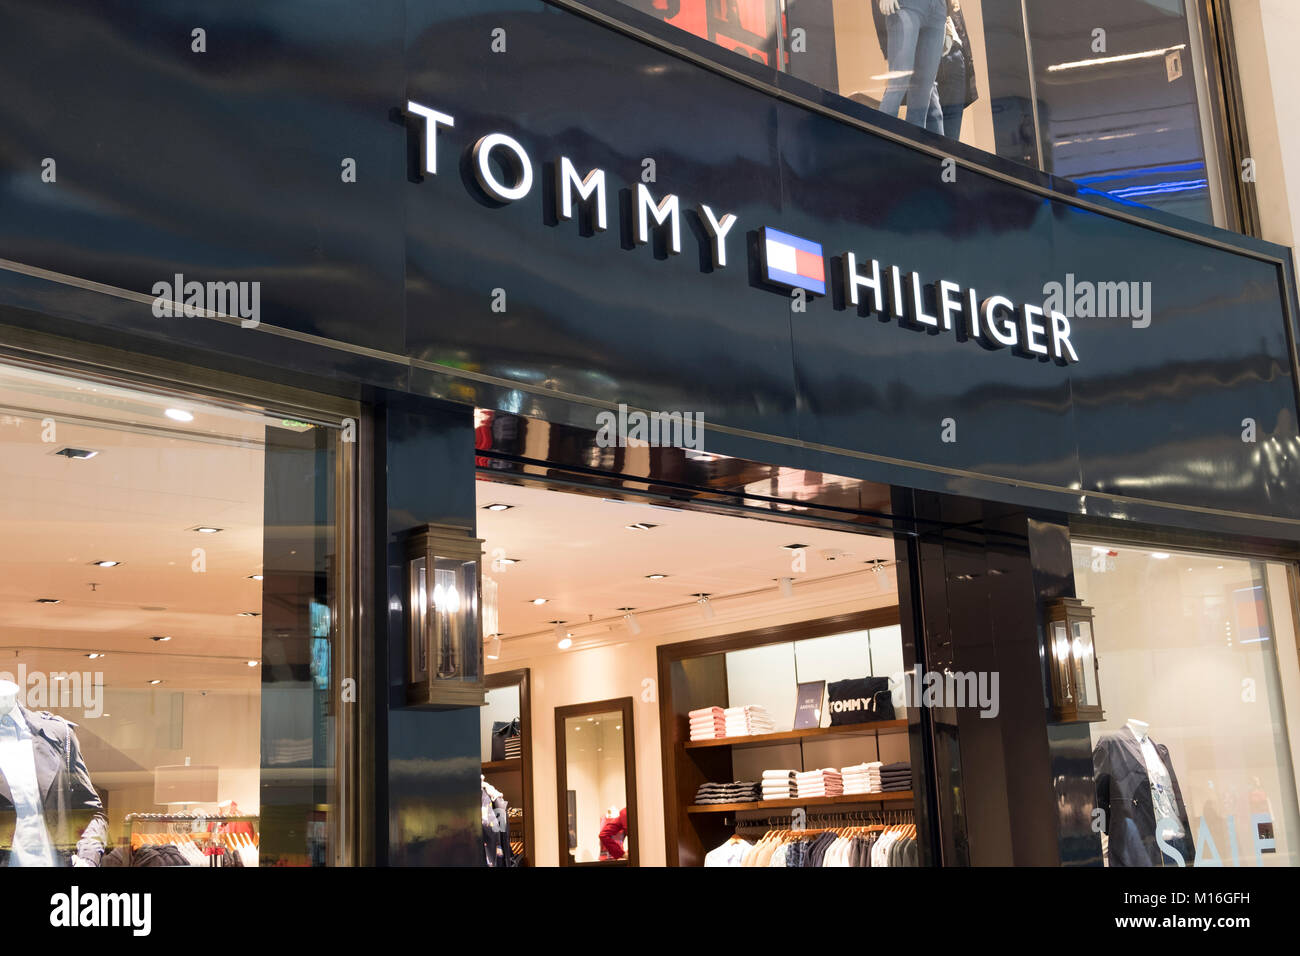 Outlet Ropa Tommy Hilfiger Best Store, 44% OFF | indi-square.com